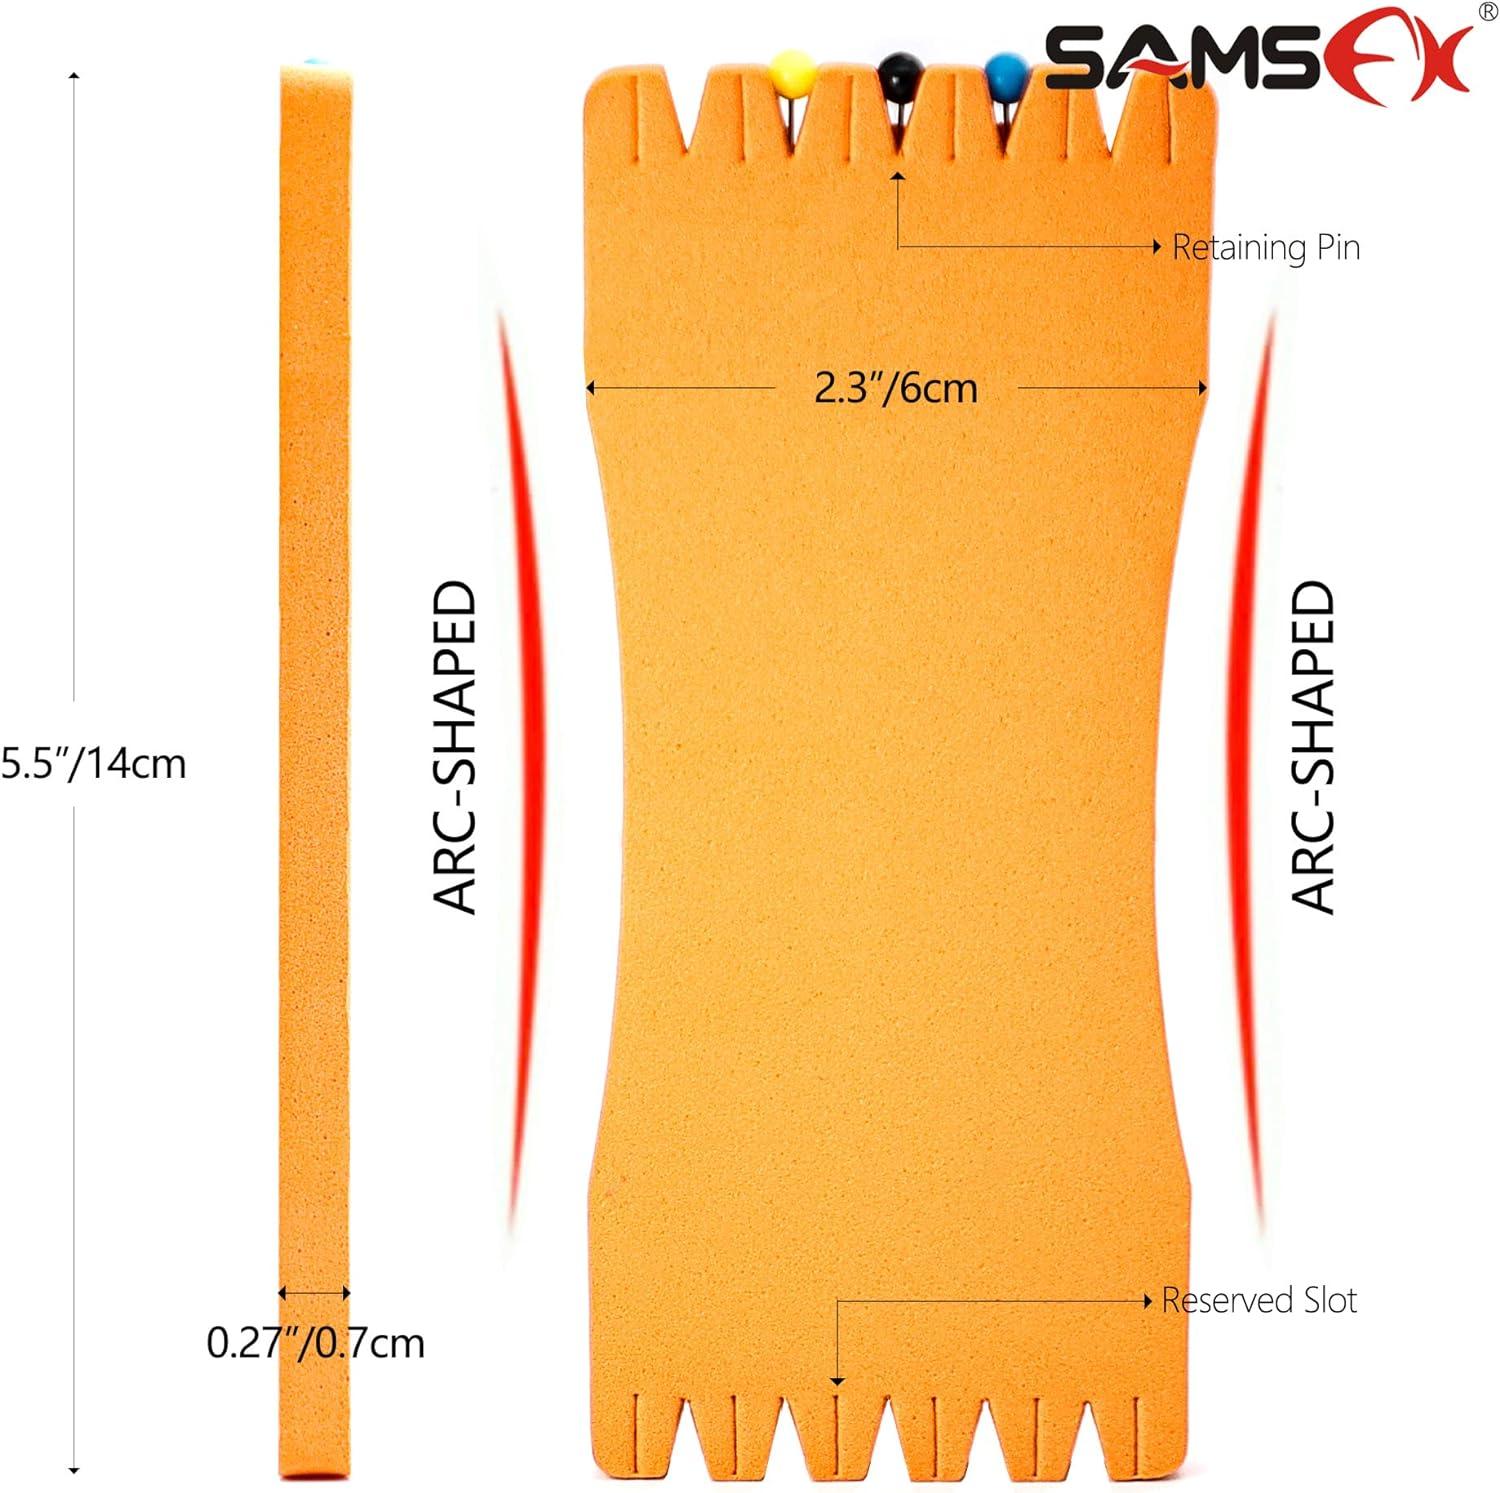  SAMSFX Fishing Leader Line Holder Foam Board Snelled Hook  Keeper with Retaining Pins Accessories Pack of 10 (14 x 6cm, Pins Included)  : Sports & Outdoors